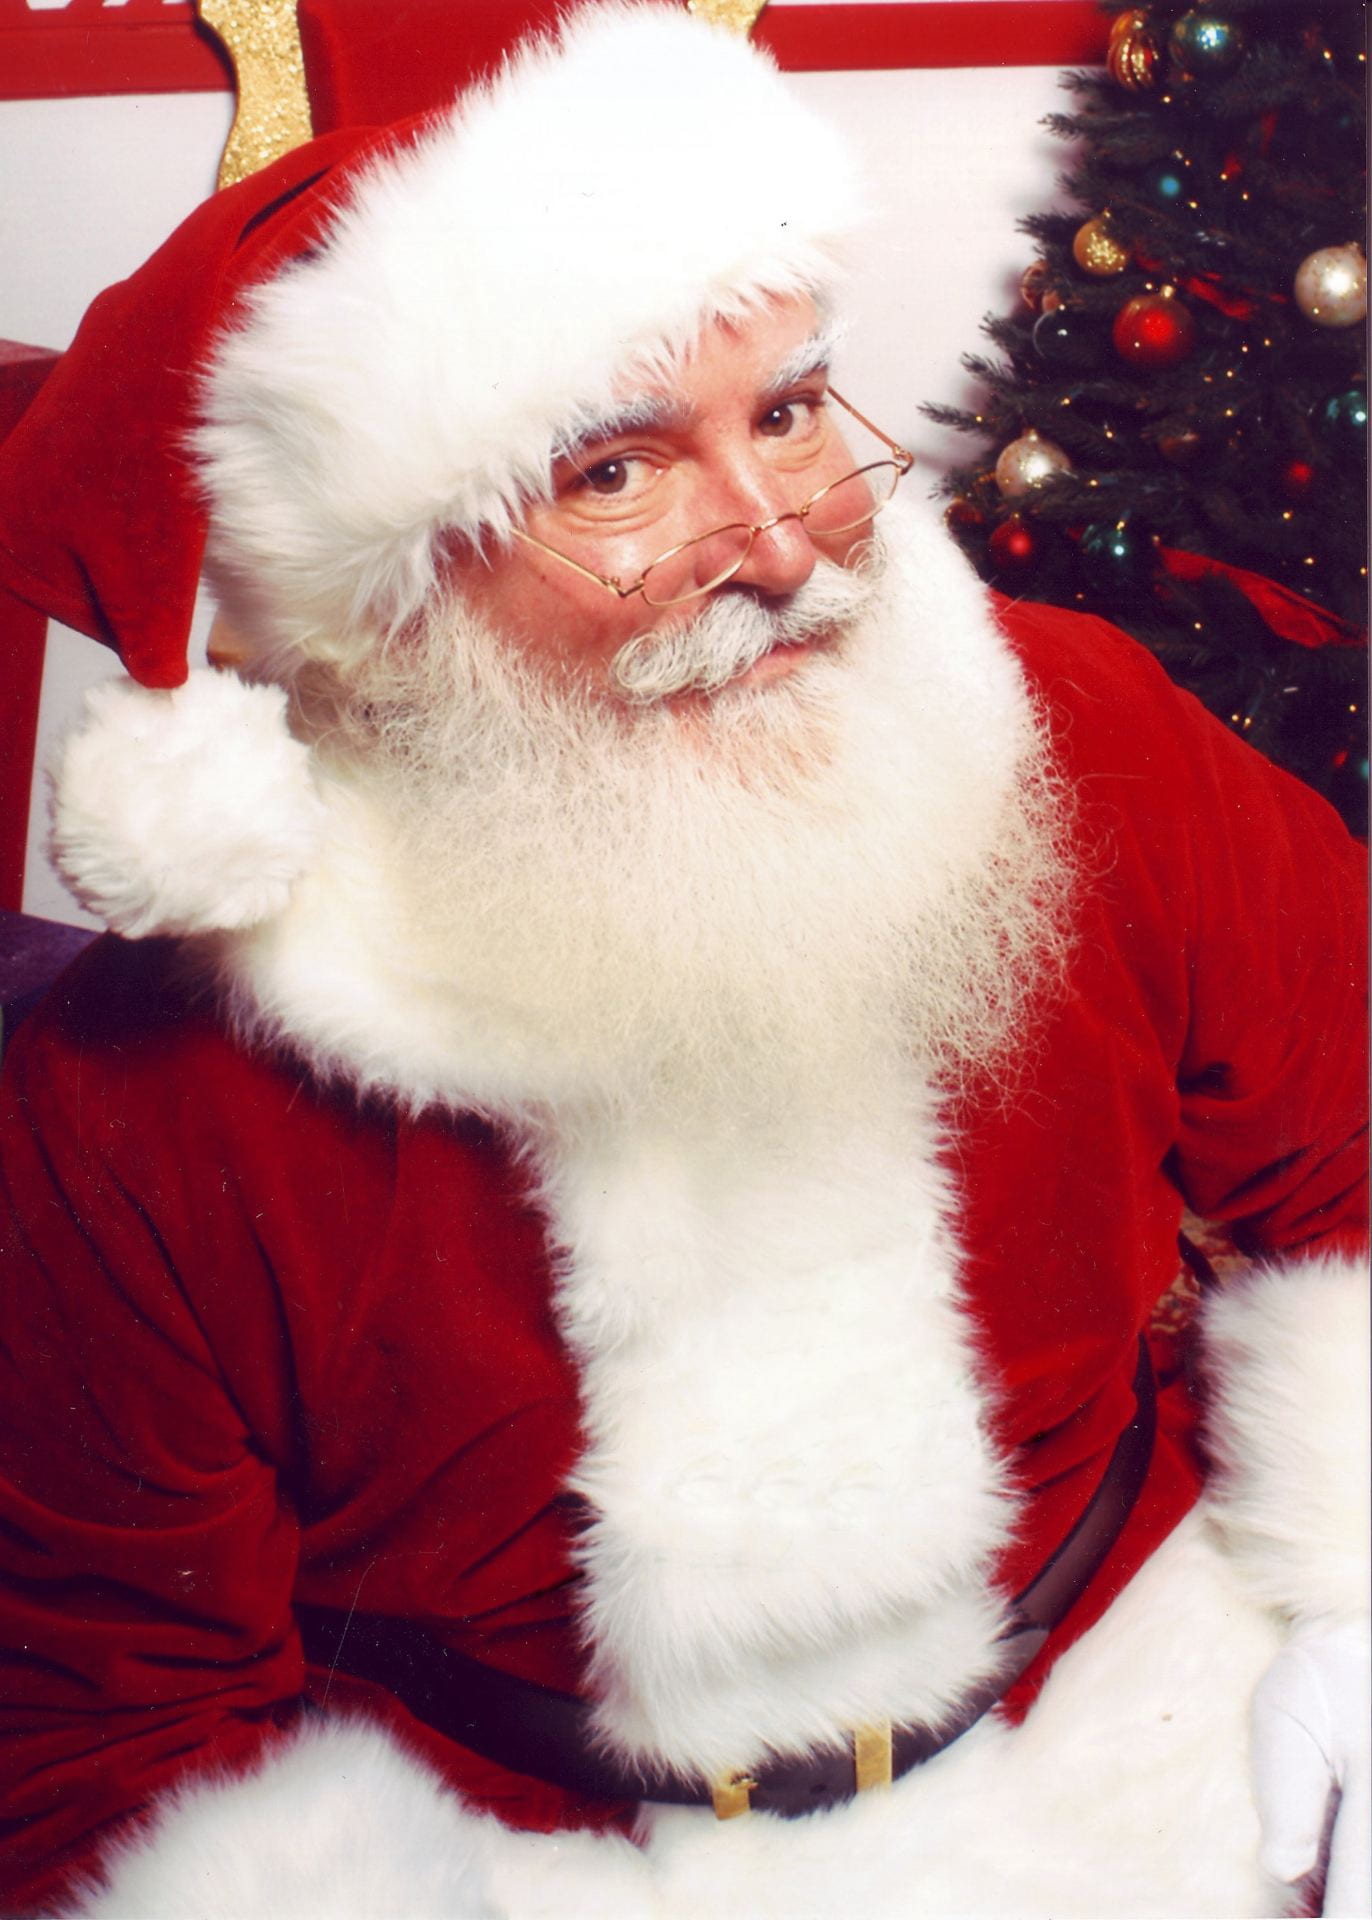 An older man with a white beard in a red suit lined with white fur. He has glasses and rosy cheeks.